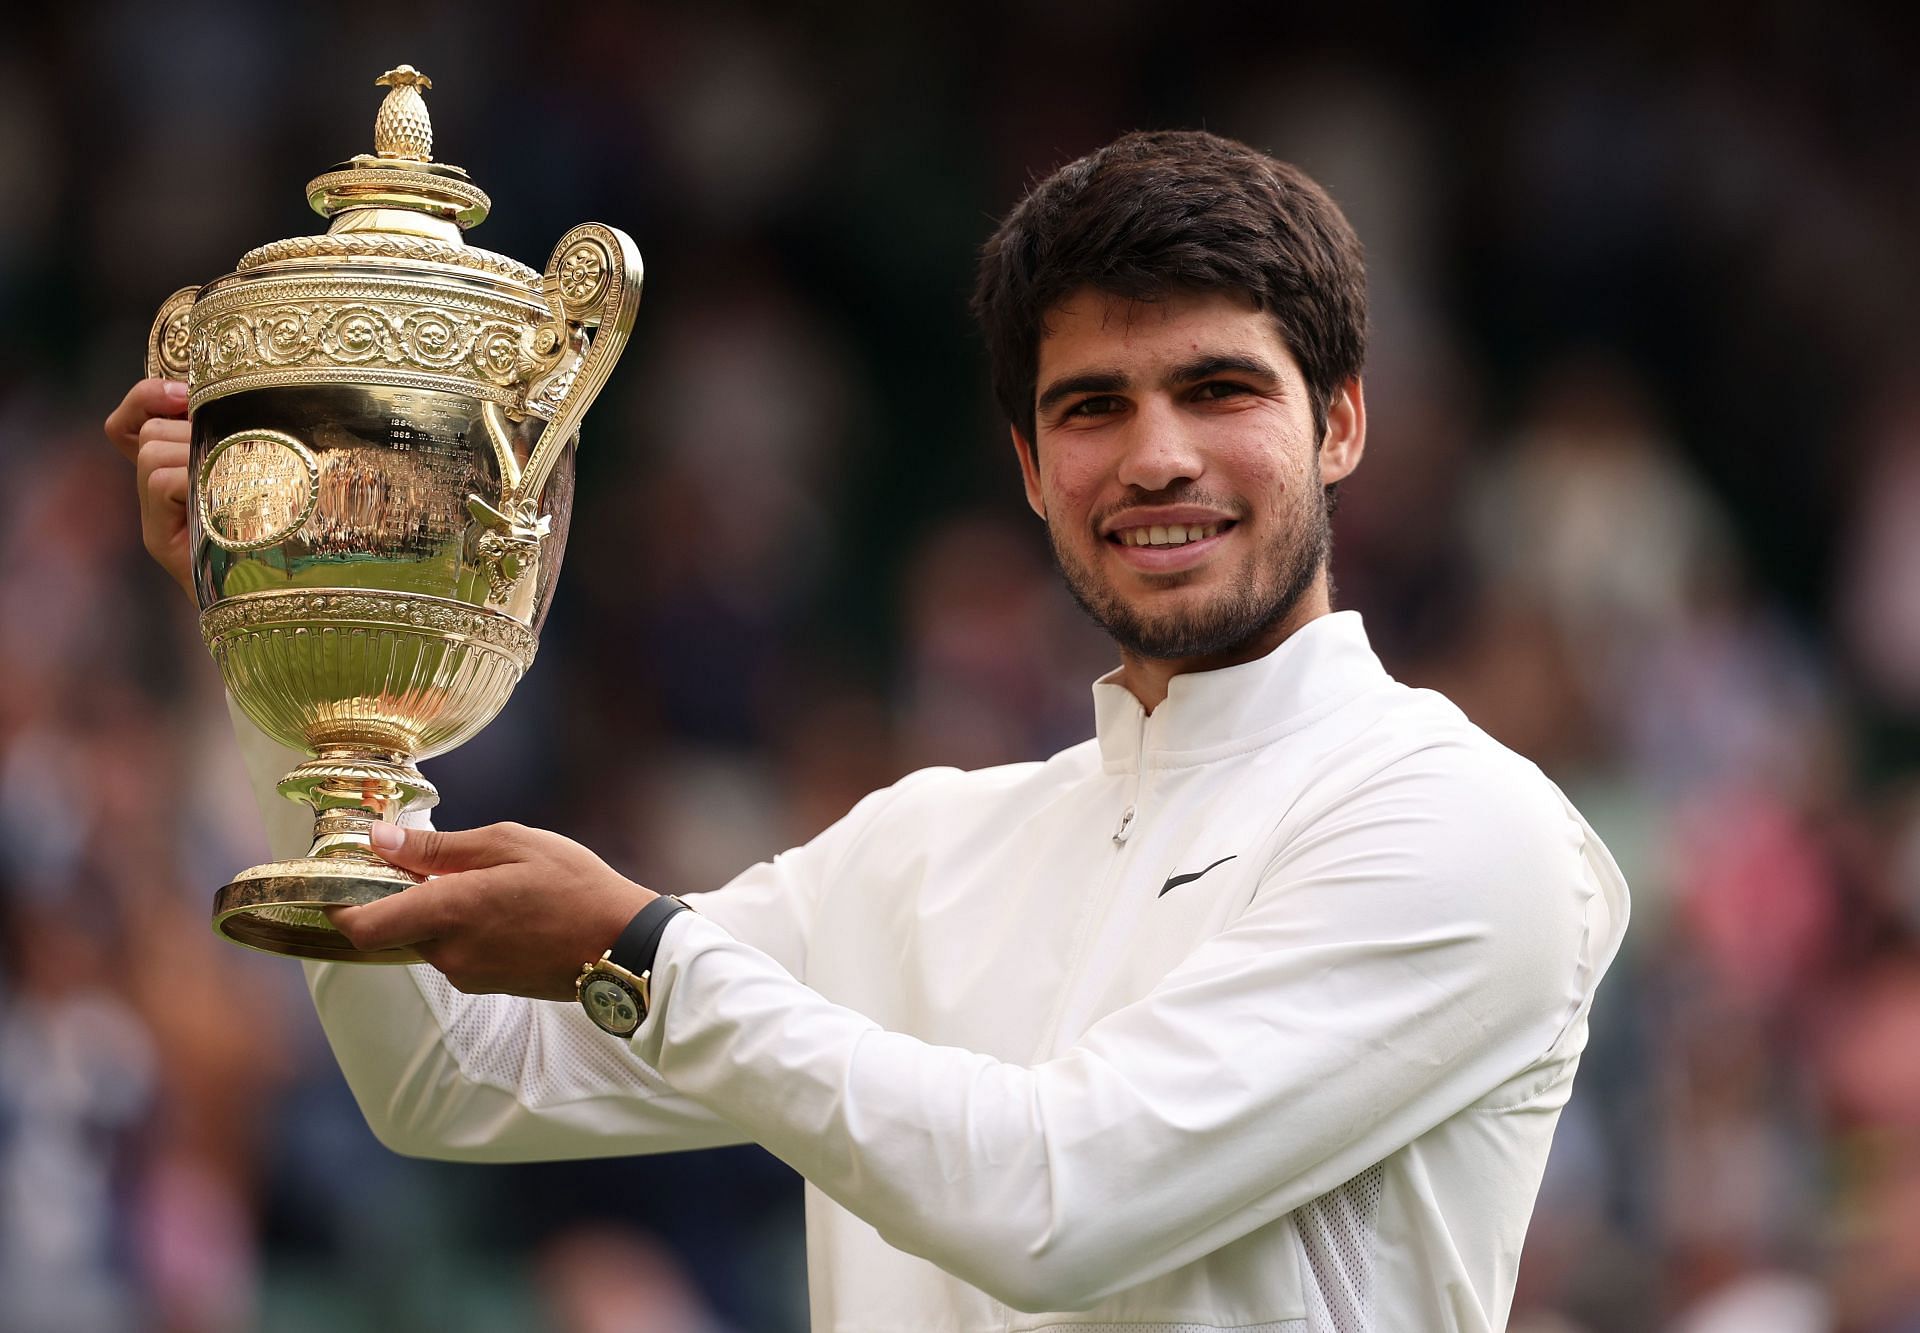 Carlos Alcaraz with the Wimbledon Trophy (via Getty Images)